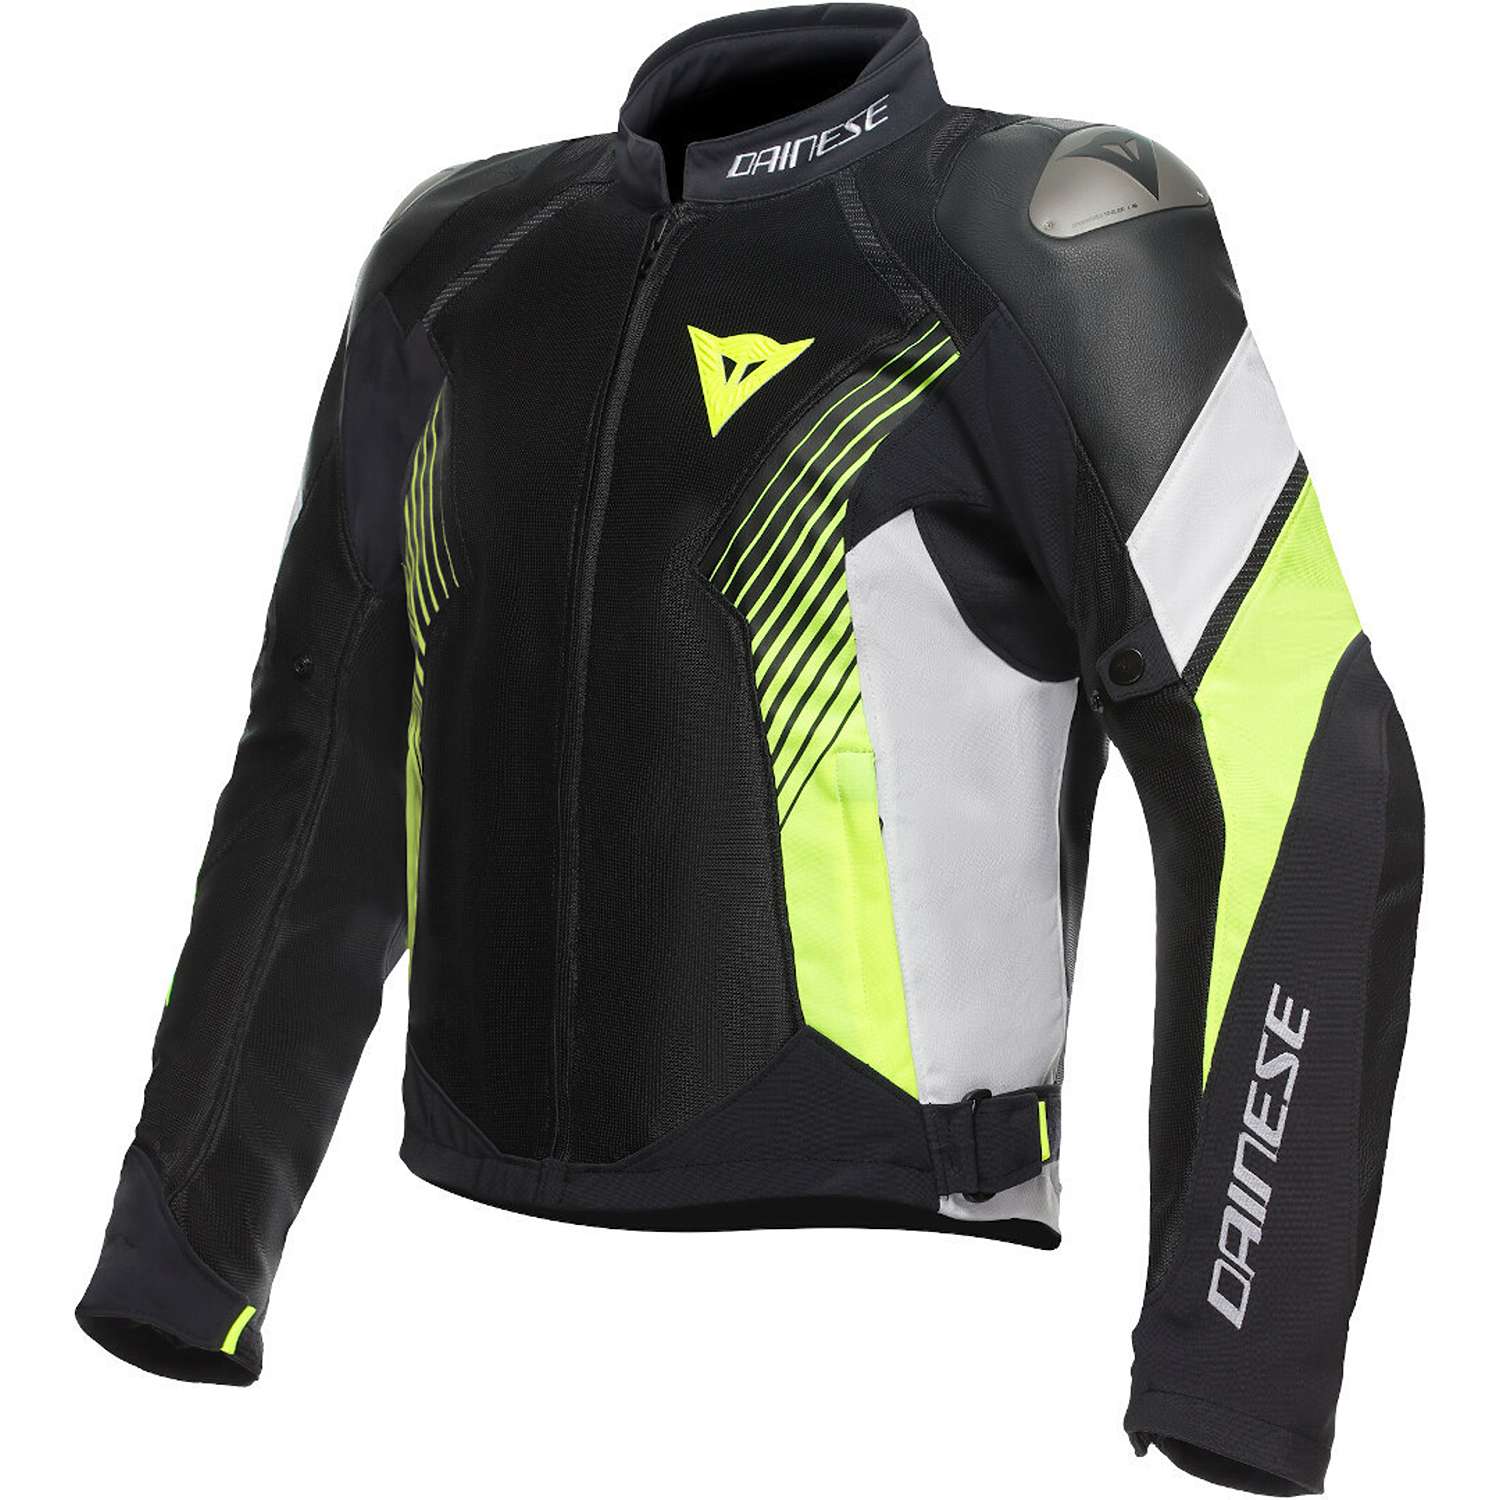 Image of Dainese Super Rider 2 Absoluteshell Jacket Black White Fluo Yellow Taille 52